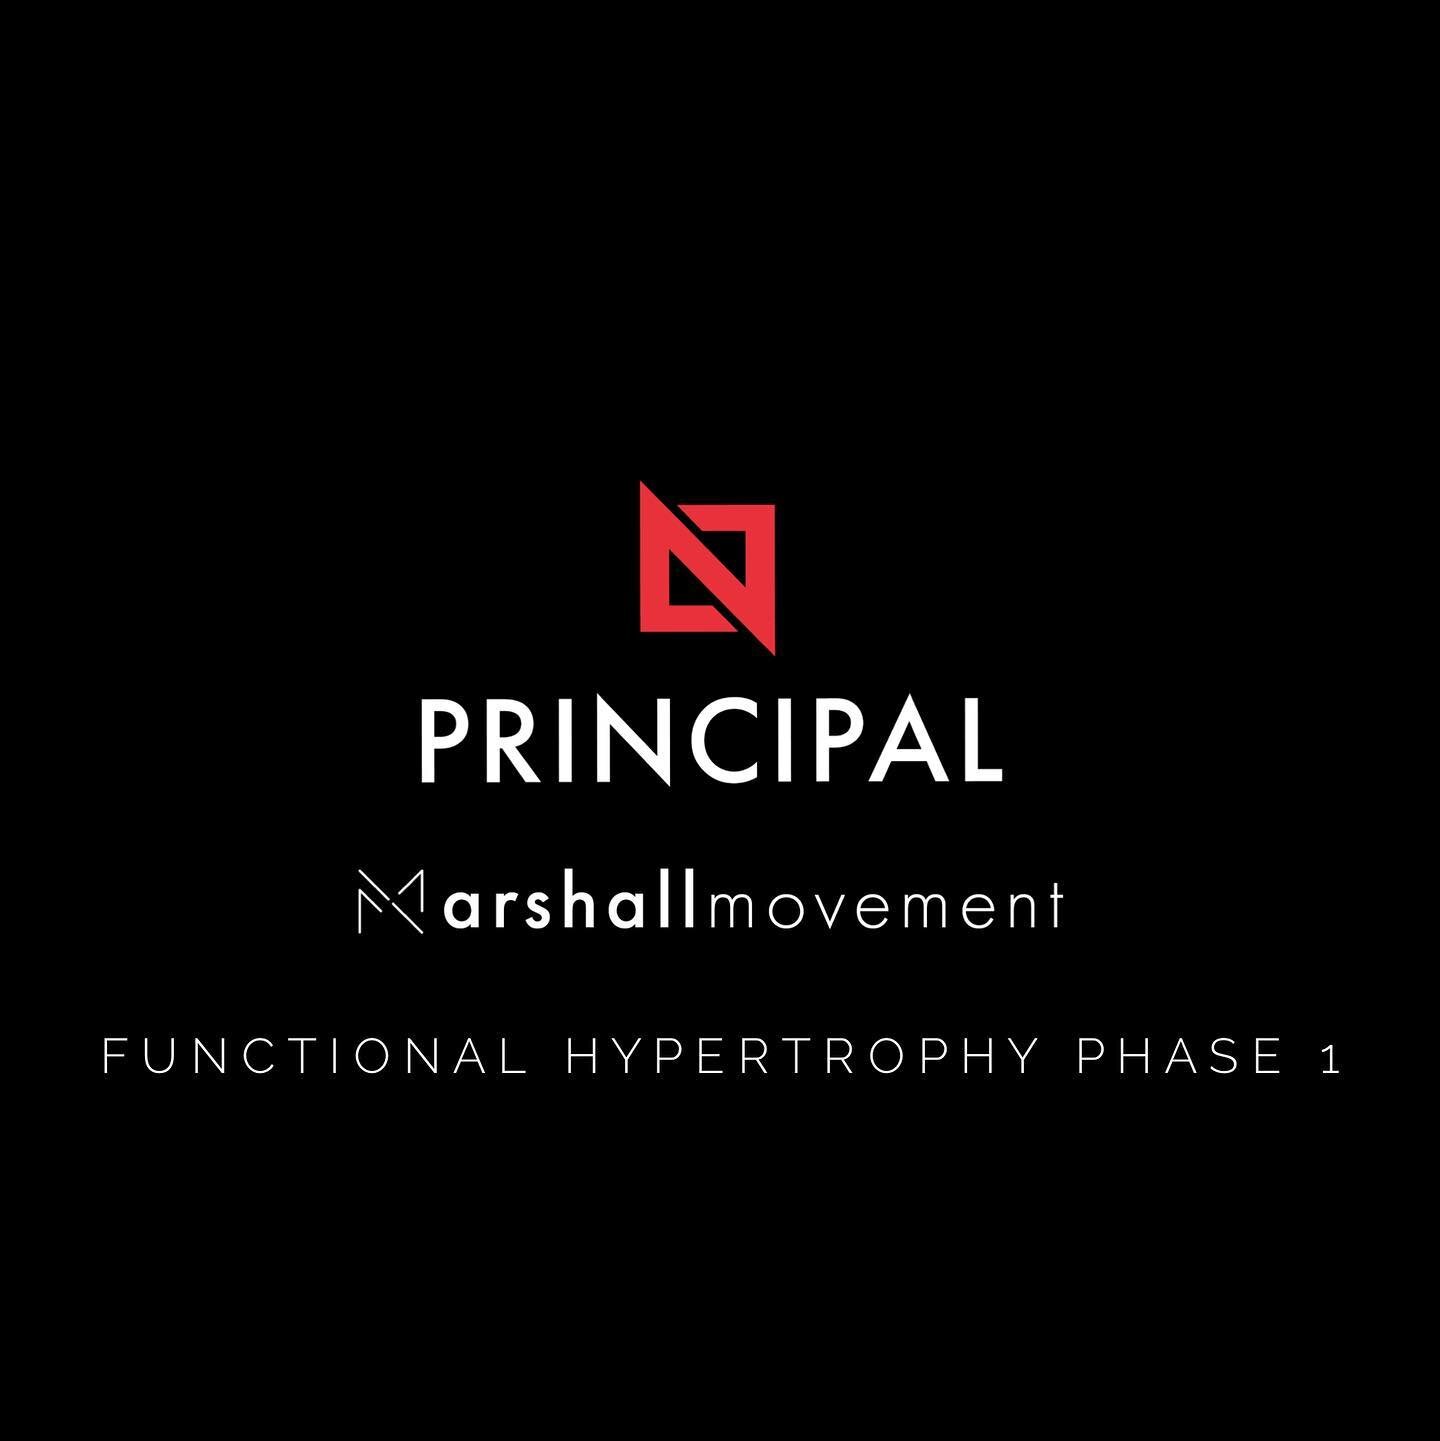 Available NOW!

Functional hypertrophy phase 1 👊🏽

▪️Option 1 : 12 week progressive online program with coach support : 5 sessions a week (2 upper / 2 lower body focus and 1 mixed) only &pound;90

▪️Option 2 : 12 week progressive online program wit